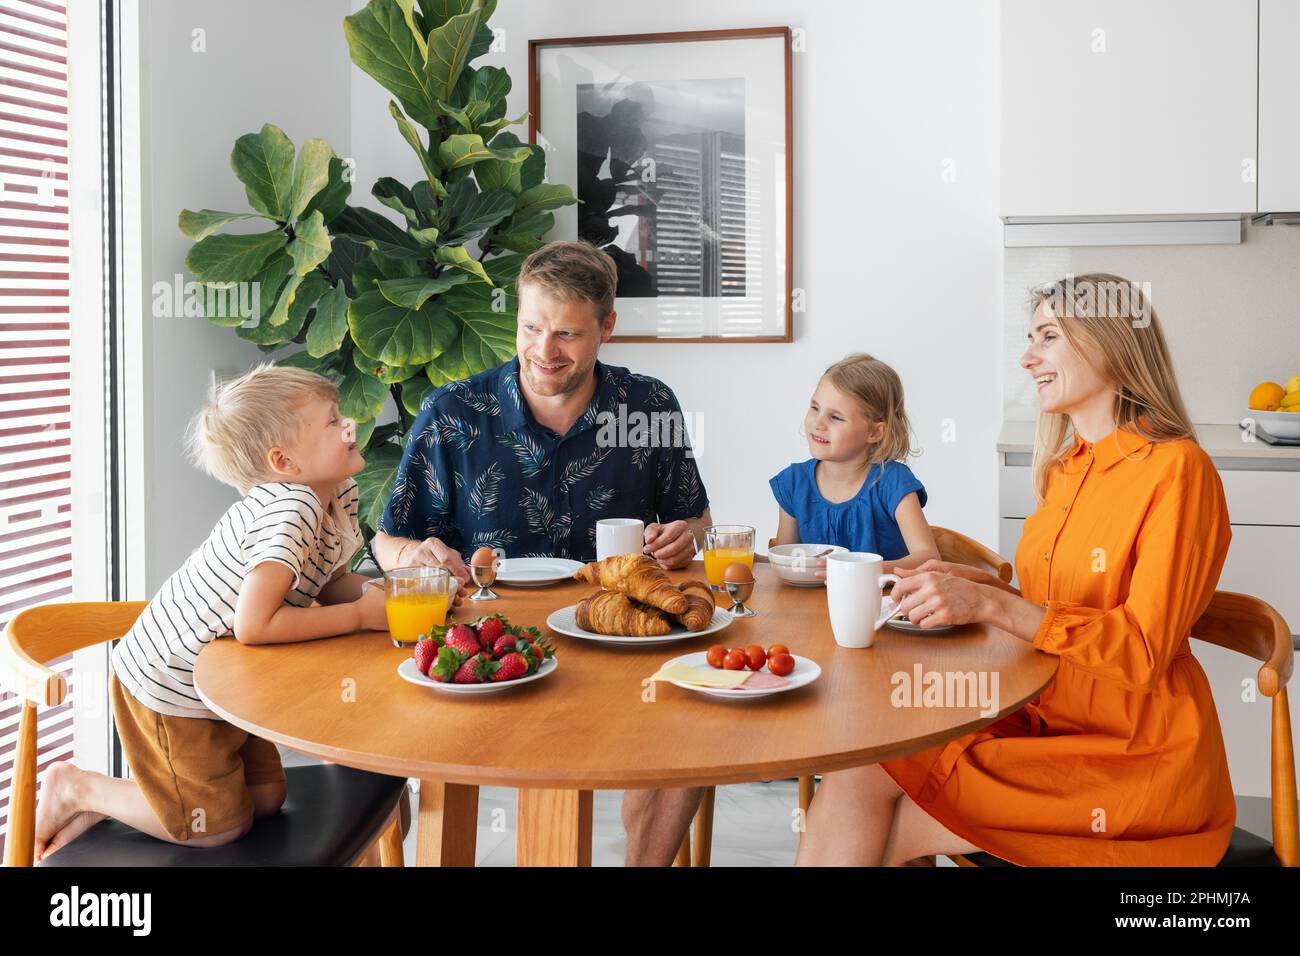 https://c8.alamy.com/comp/2PHMJ7A/happy-family-with-two-children-sitting-by-the-table-and-eating-breakfast-in-the-morning-at-home-kitchen-2PHMJ7A.jpg